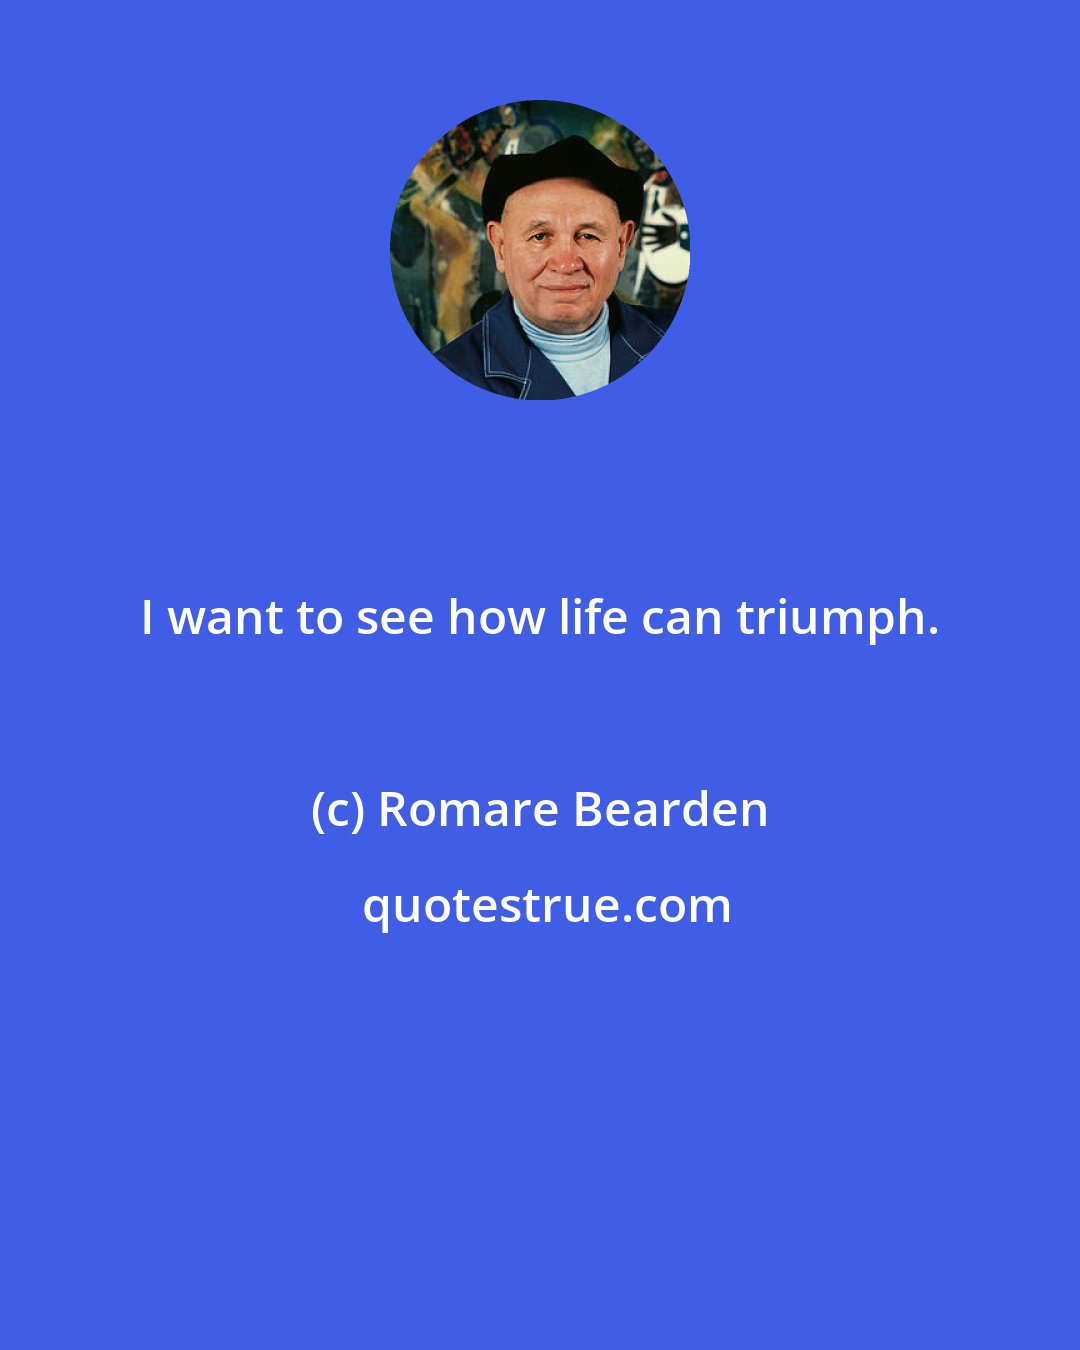 Romare Bearden: I want to see how life can triumph.